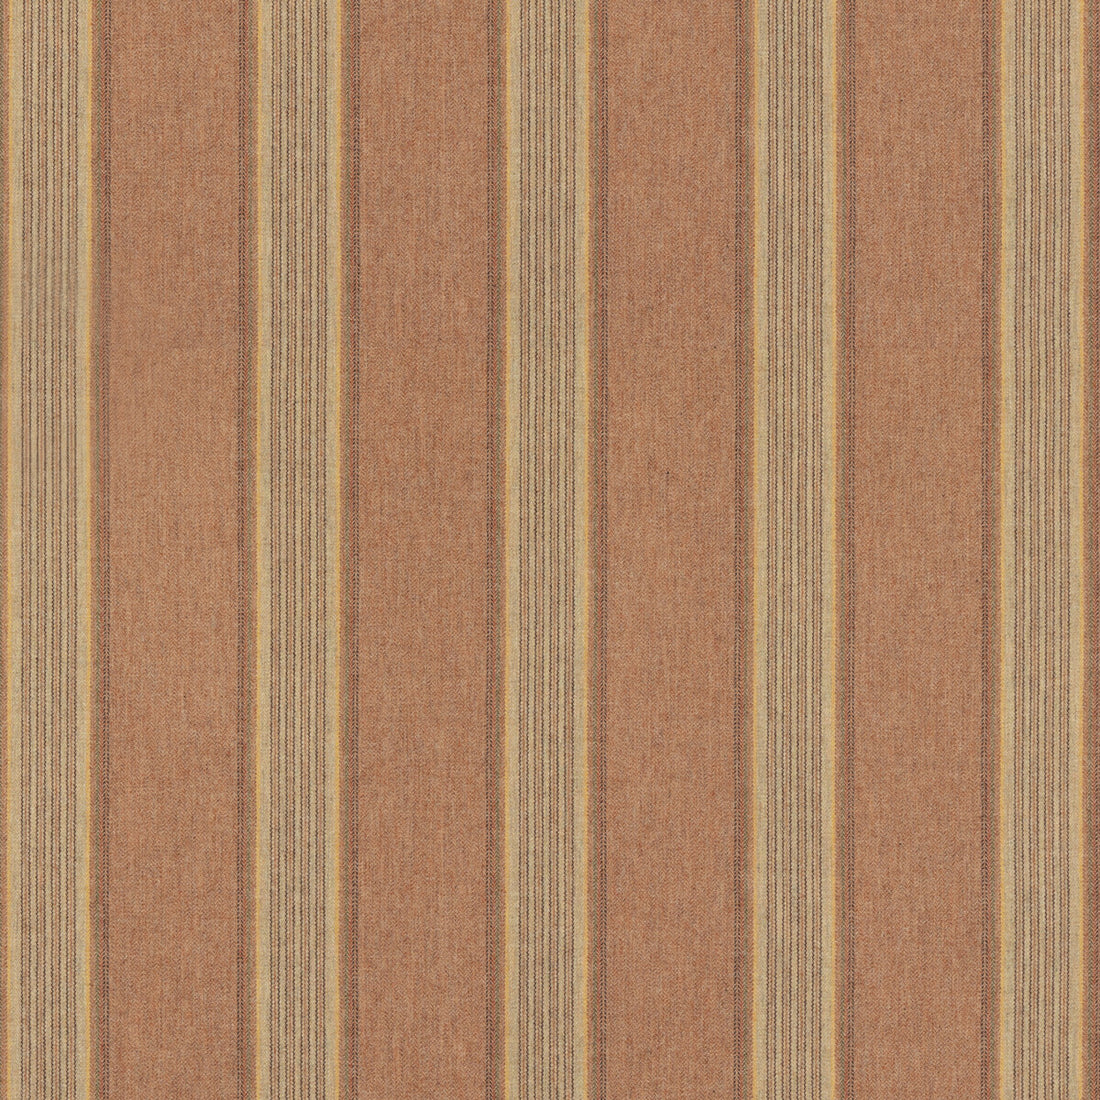 Moray Stripe fabric in rose/sand color - pattern FD808.V59.0 - by Mulberry in the Mulberry Wools IV collection